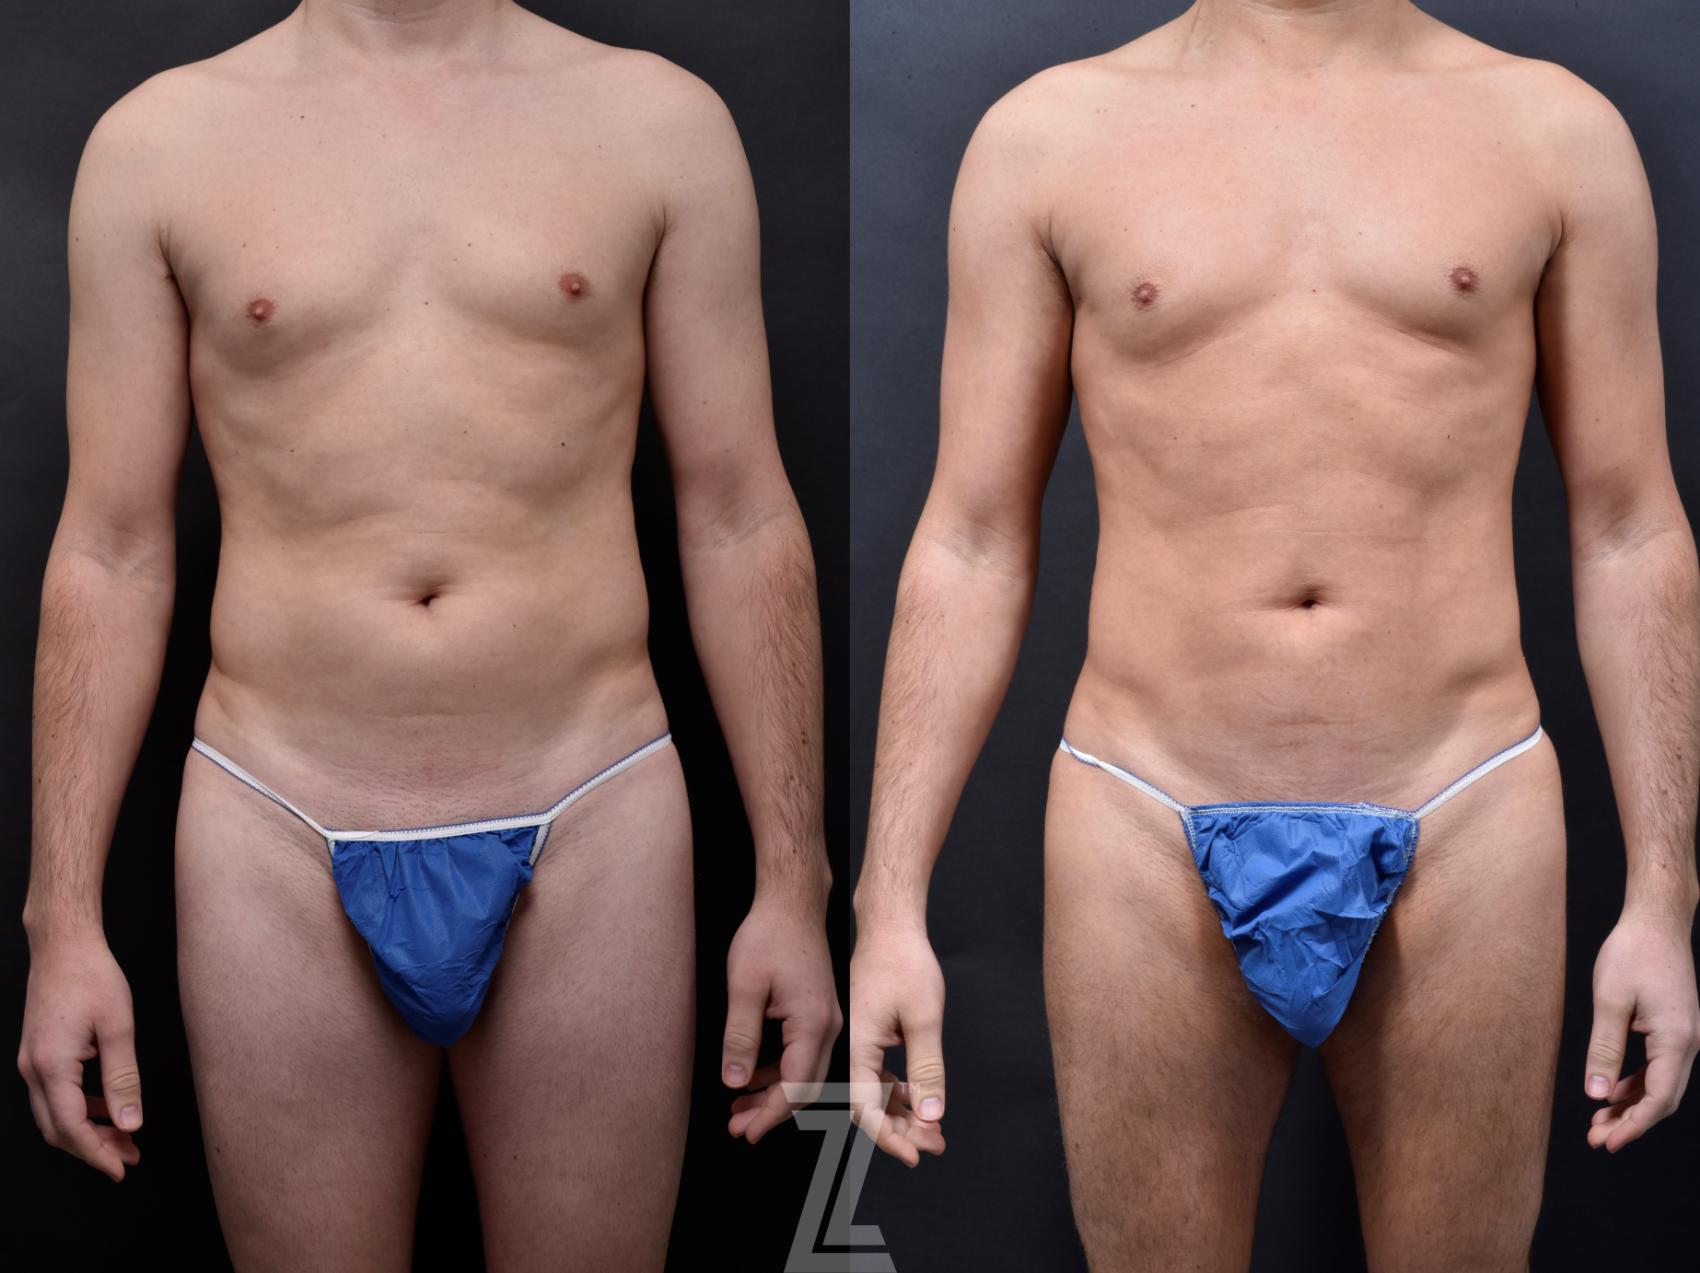 Fat Transfer Before & After Photo | Austin, TX | The Piazza Center for Plastic Surgery & Advanced Skin Care